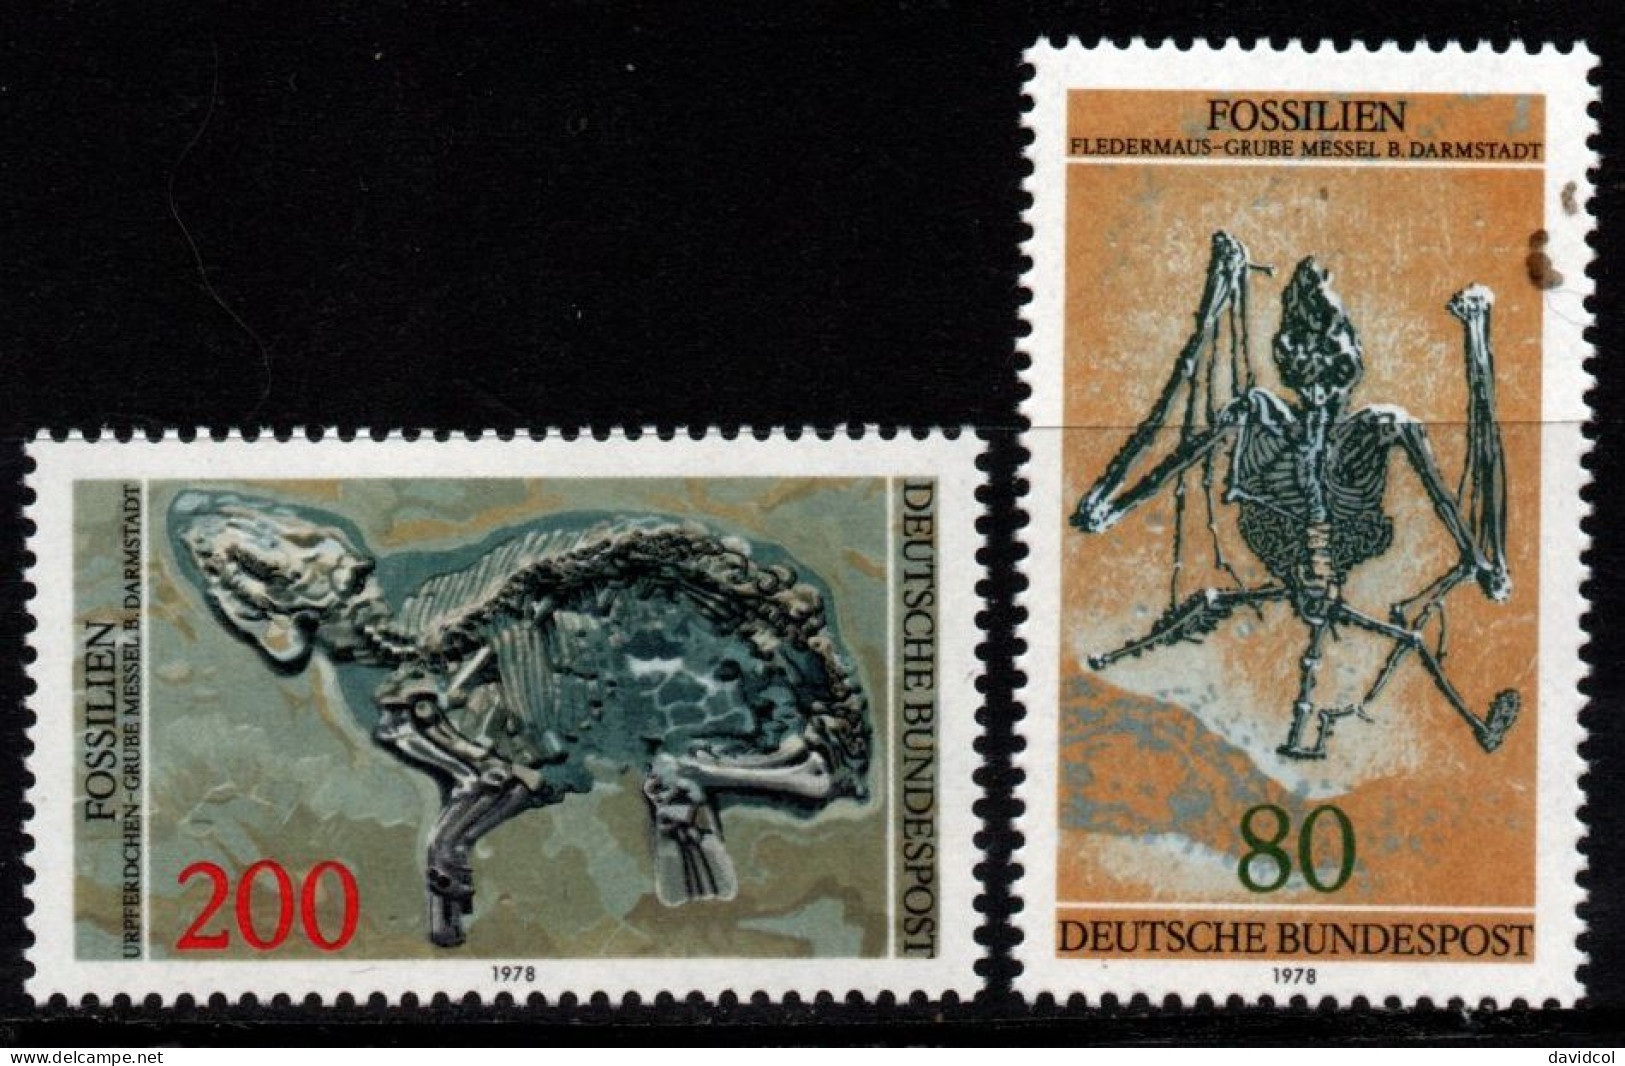 2358B - RFA, 1978 - SC#: 1275-1276 - MNH - ARCHAEOLOGICAL HERITAGE - FOSSILS - Fossiles